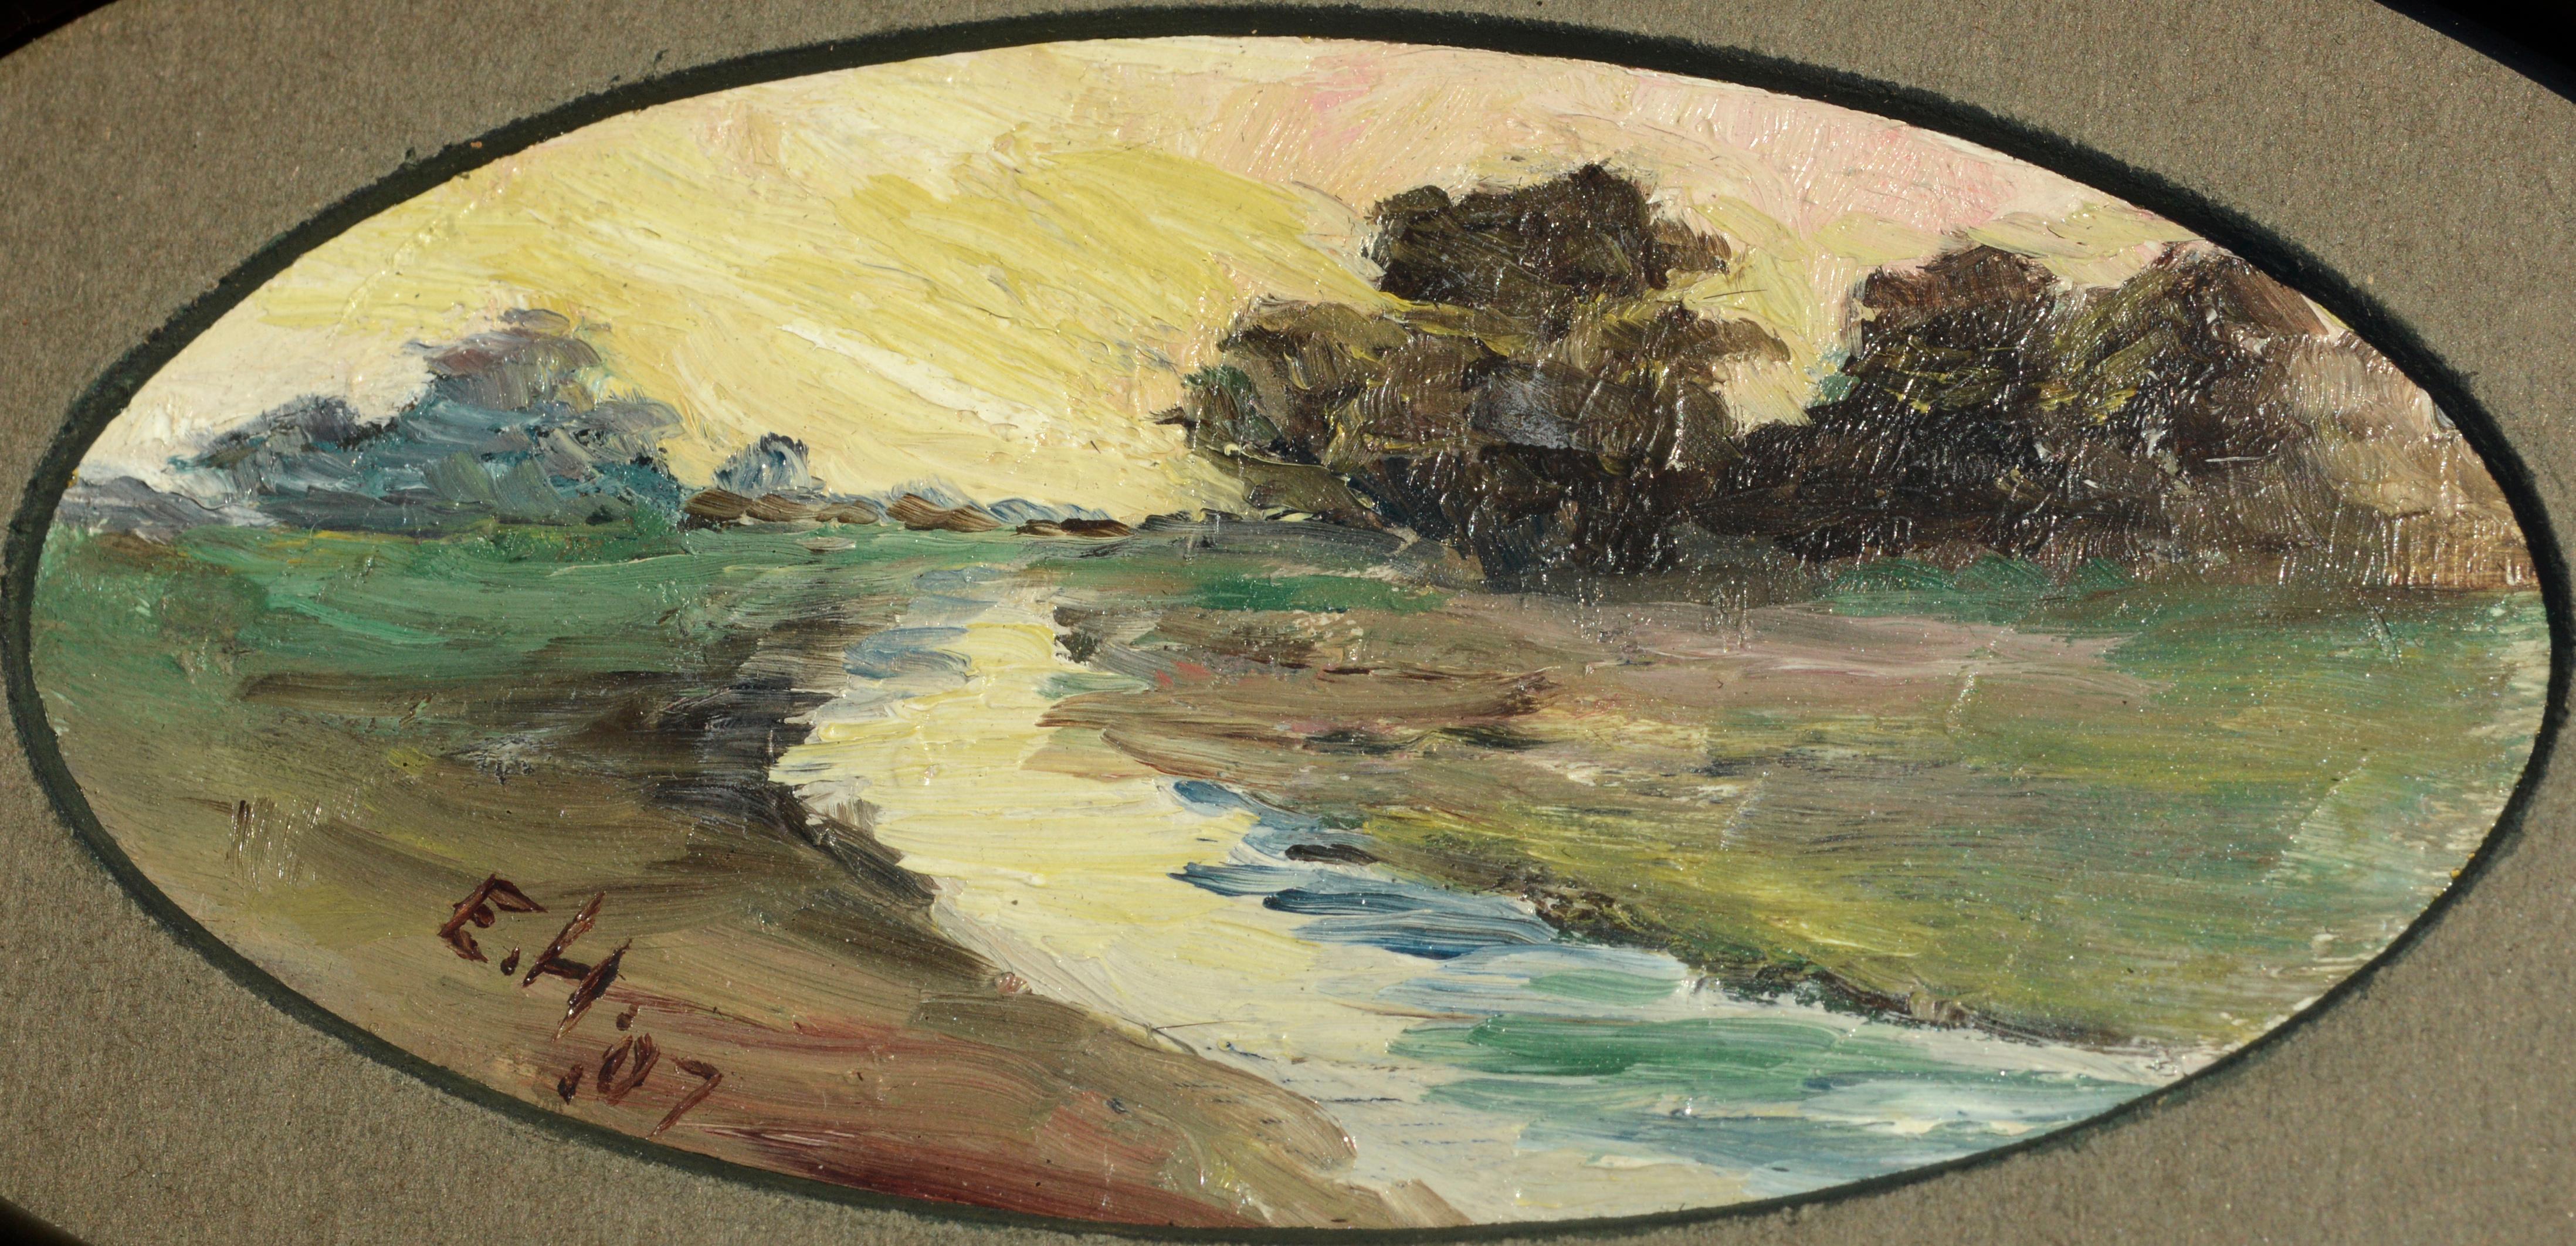 Early 20th Century Miniature Oval Landscape, San Rafael Valley Stream - Painting by Unknown